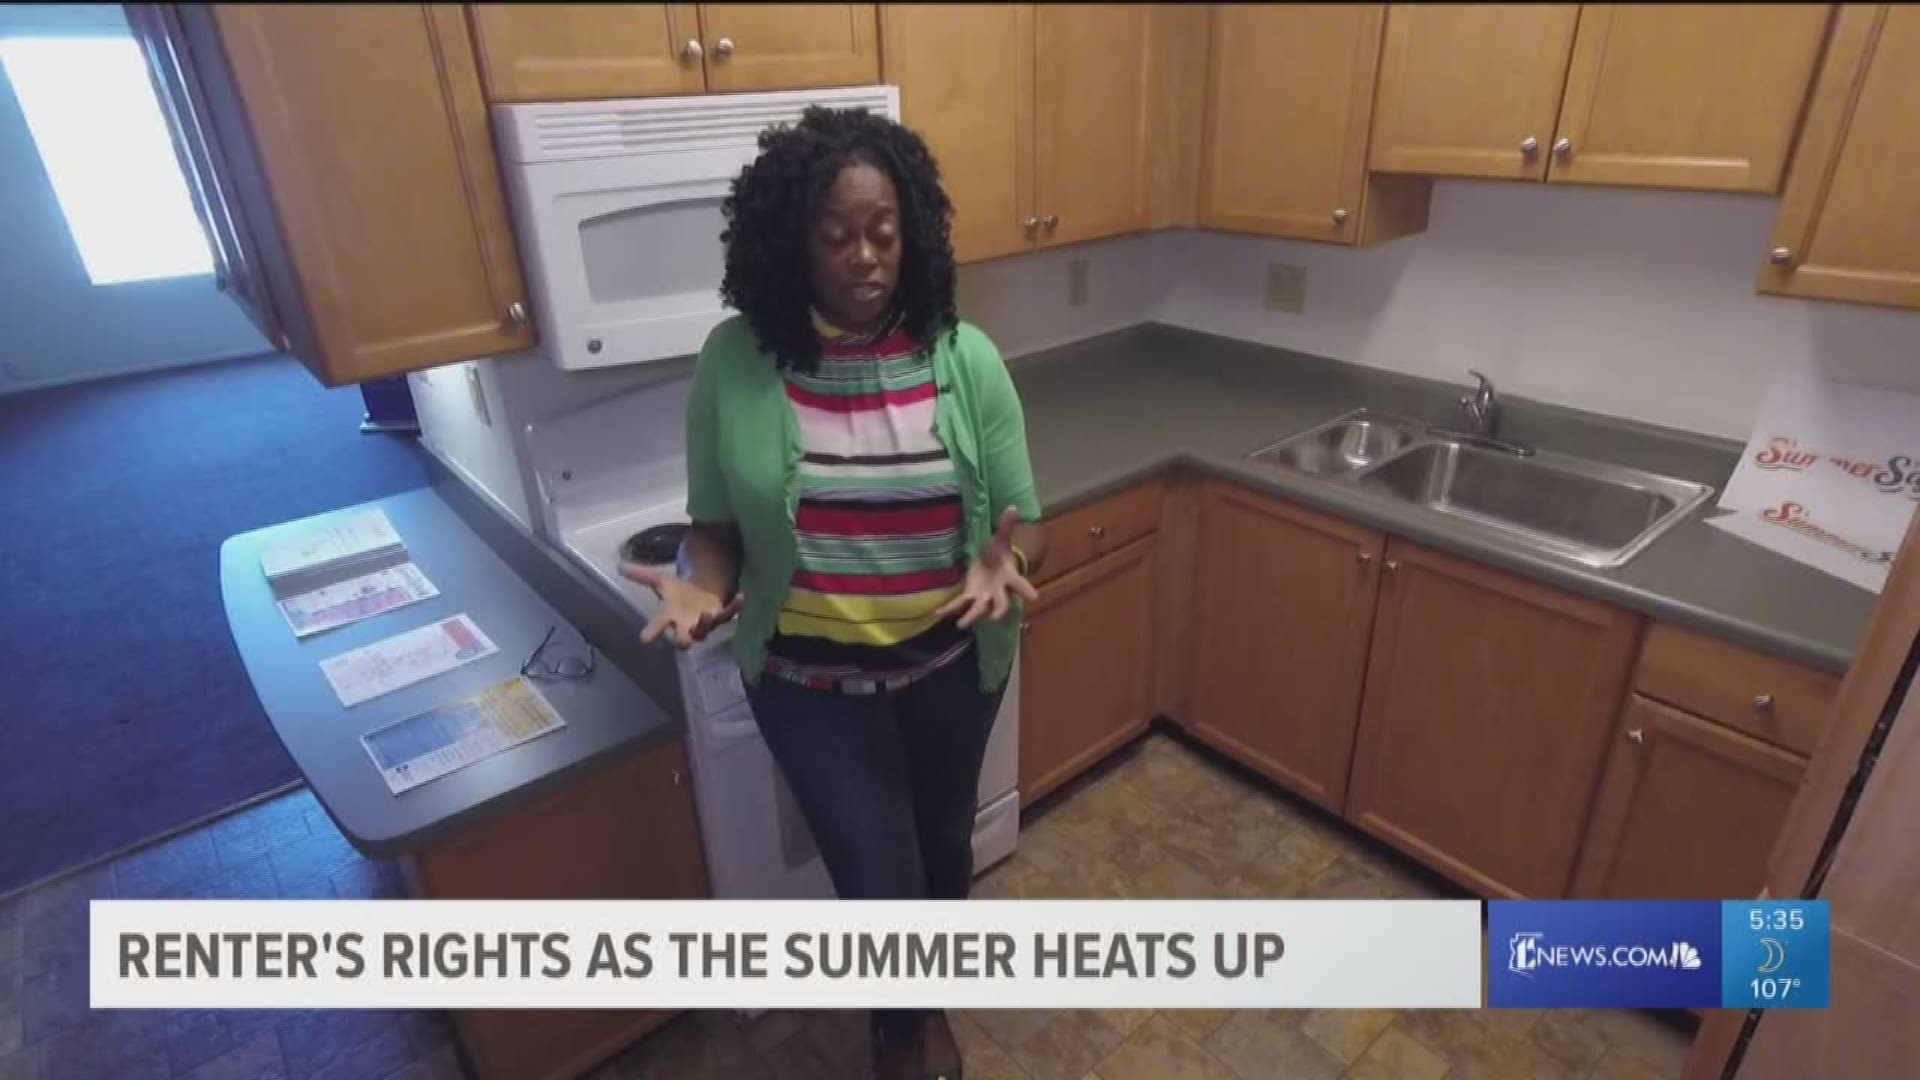 Everyone has a right to cool air. In fact, a Phoenix city code ordinance requires landlords to provide reasonable cooling to rental housing units.